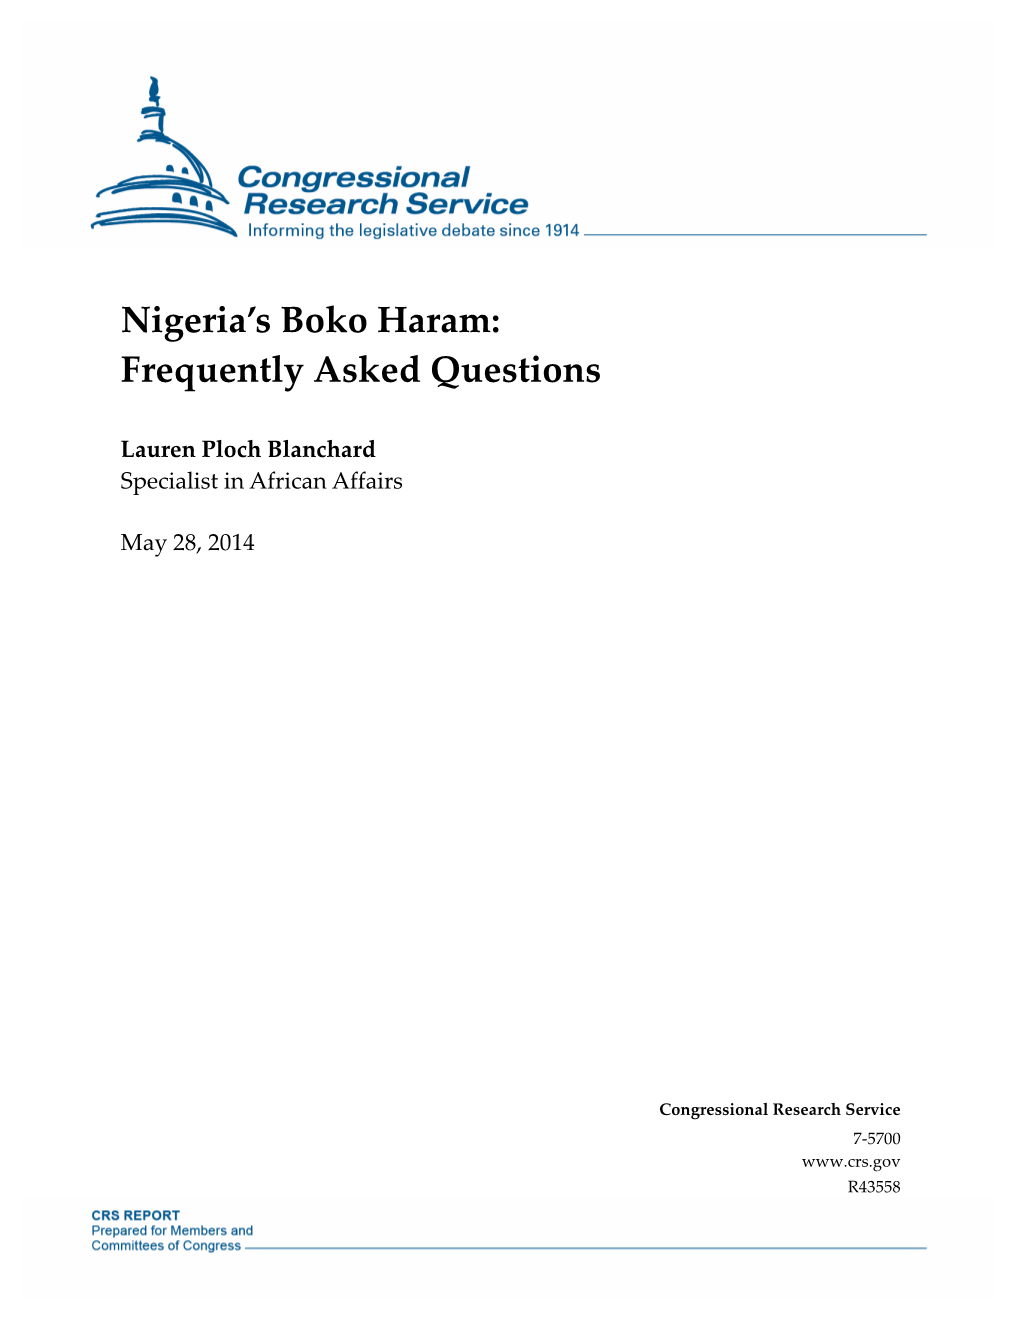 'Nigeria's Boko Haram: Frequently Asked Questions'